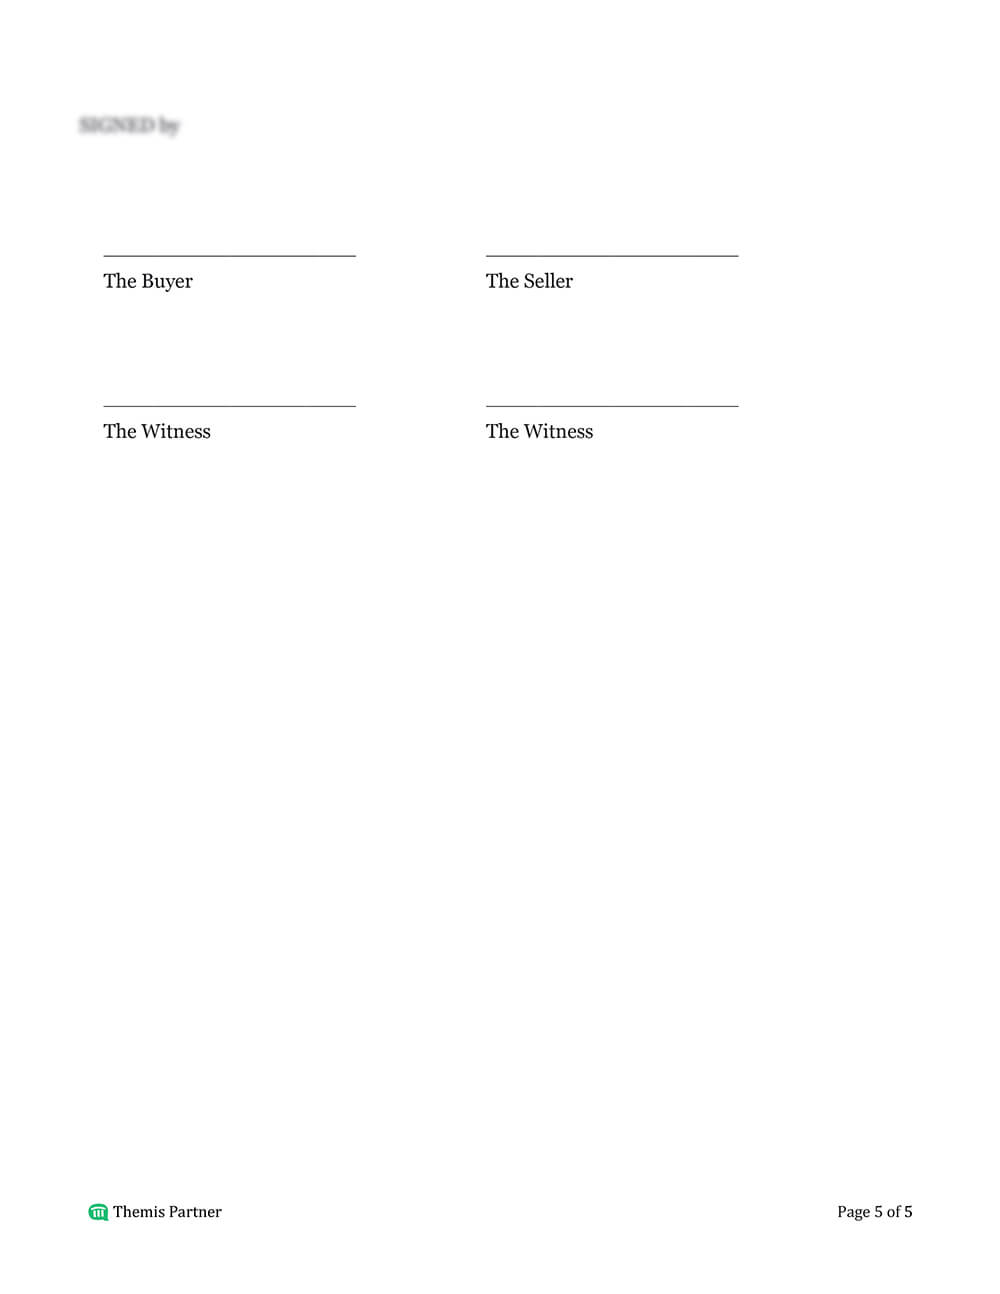 Land purchase agreement template 5